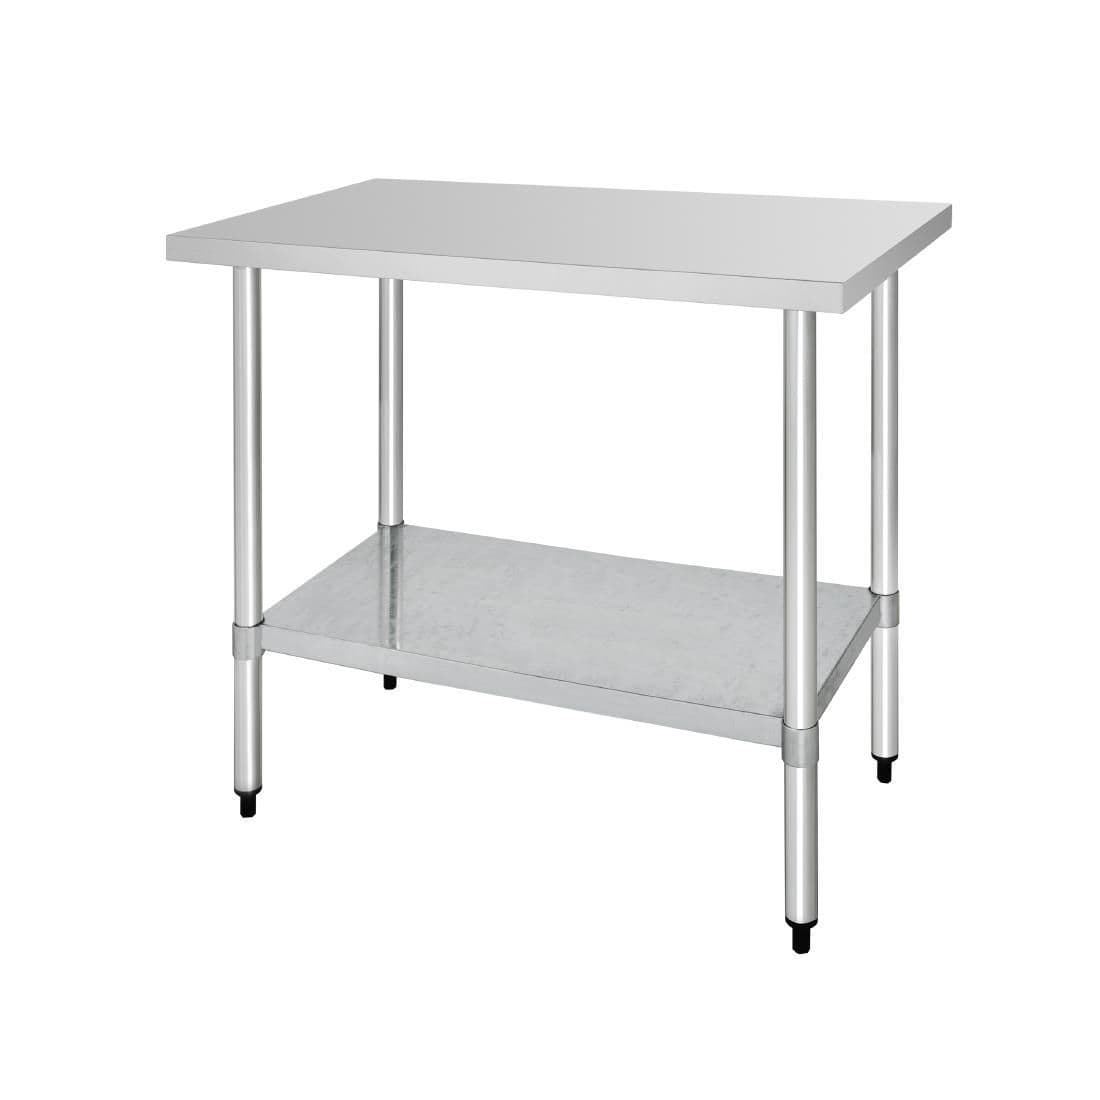 GJ502 Vogue Stainless Steel Prep Table 1200mm JD Catering Equipment Solutions Ltd